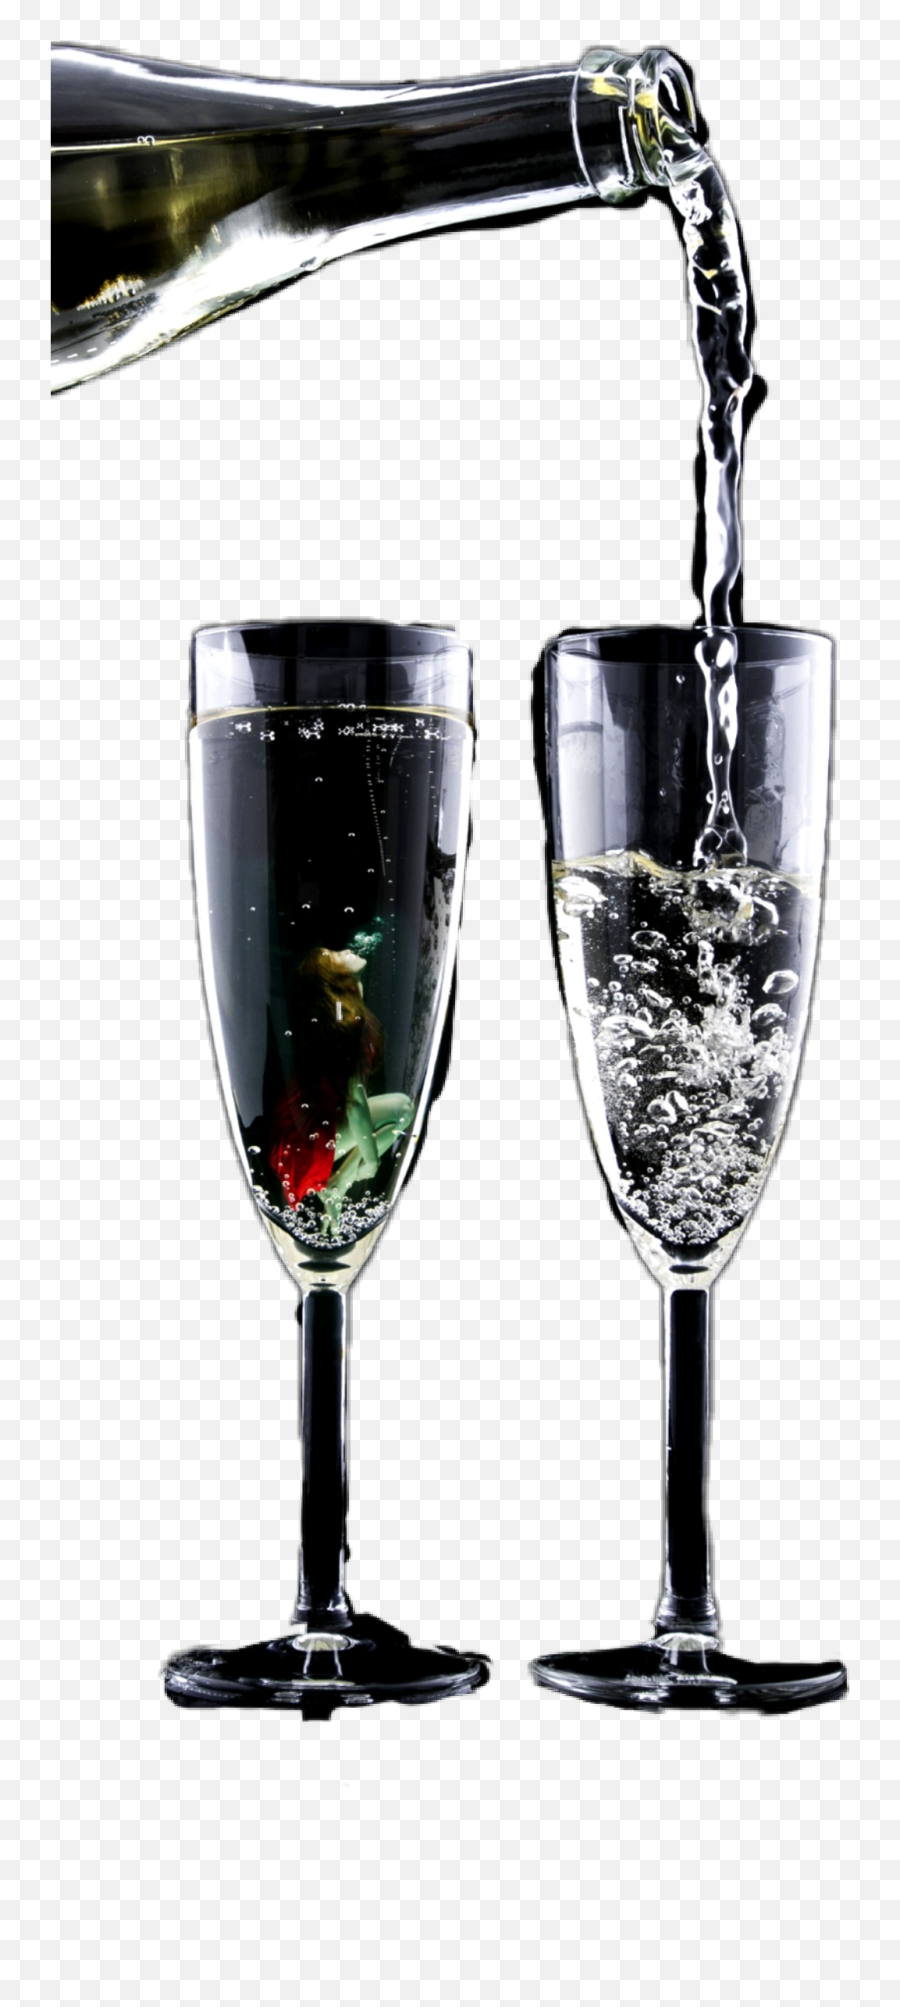 Water Pouring Bottle Hwineglass Bubbles - Bottle Png,Water Pouring Png